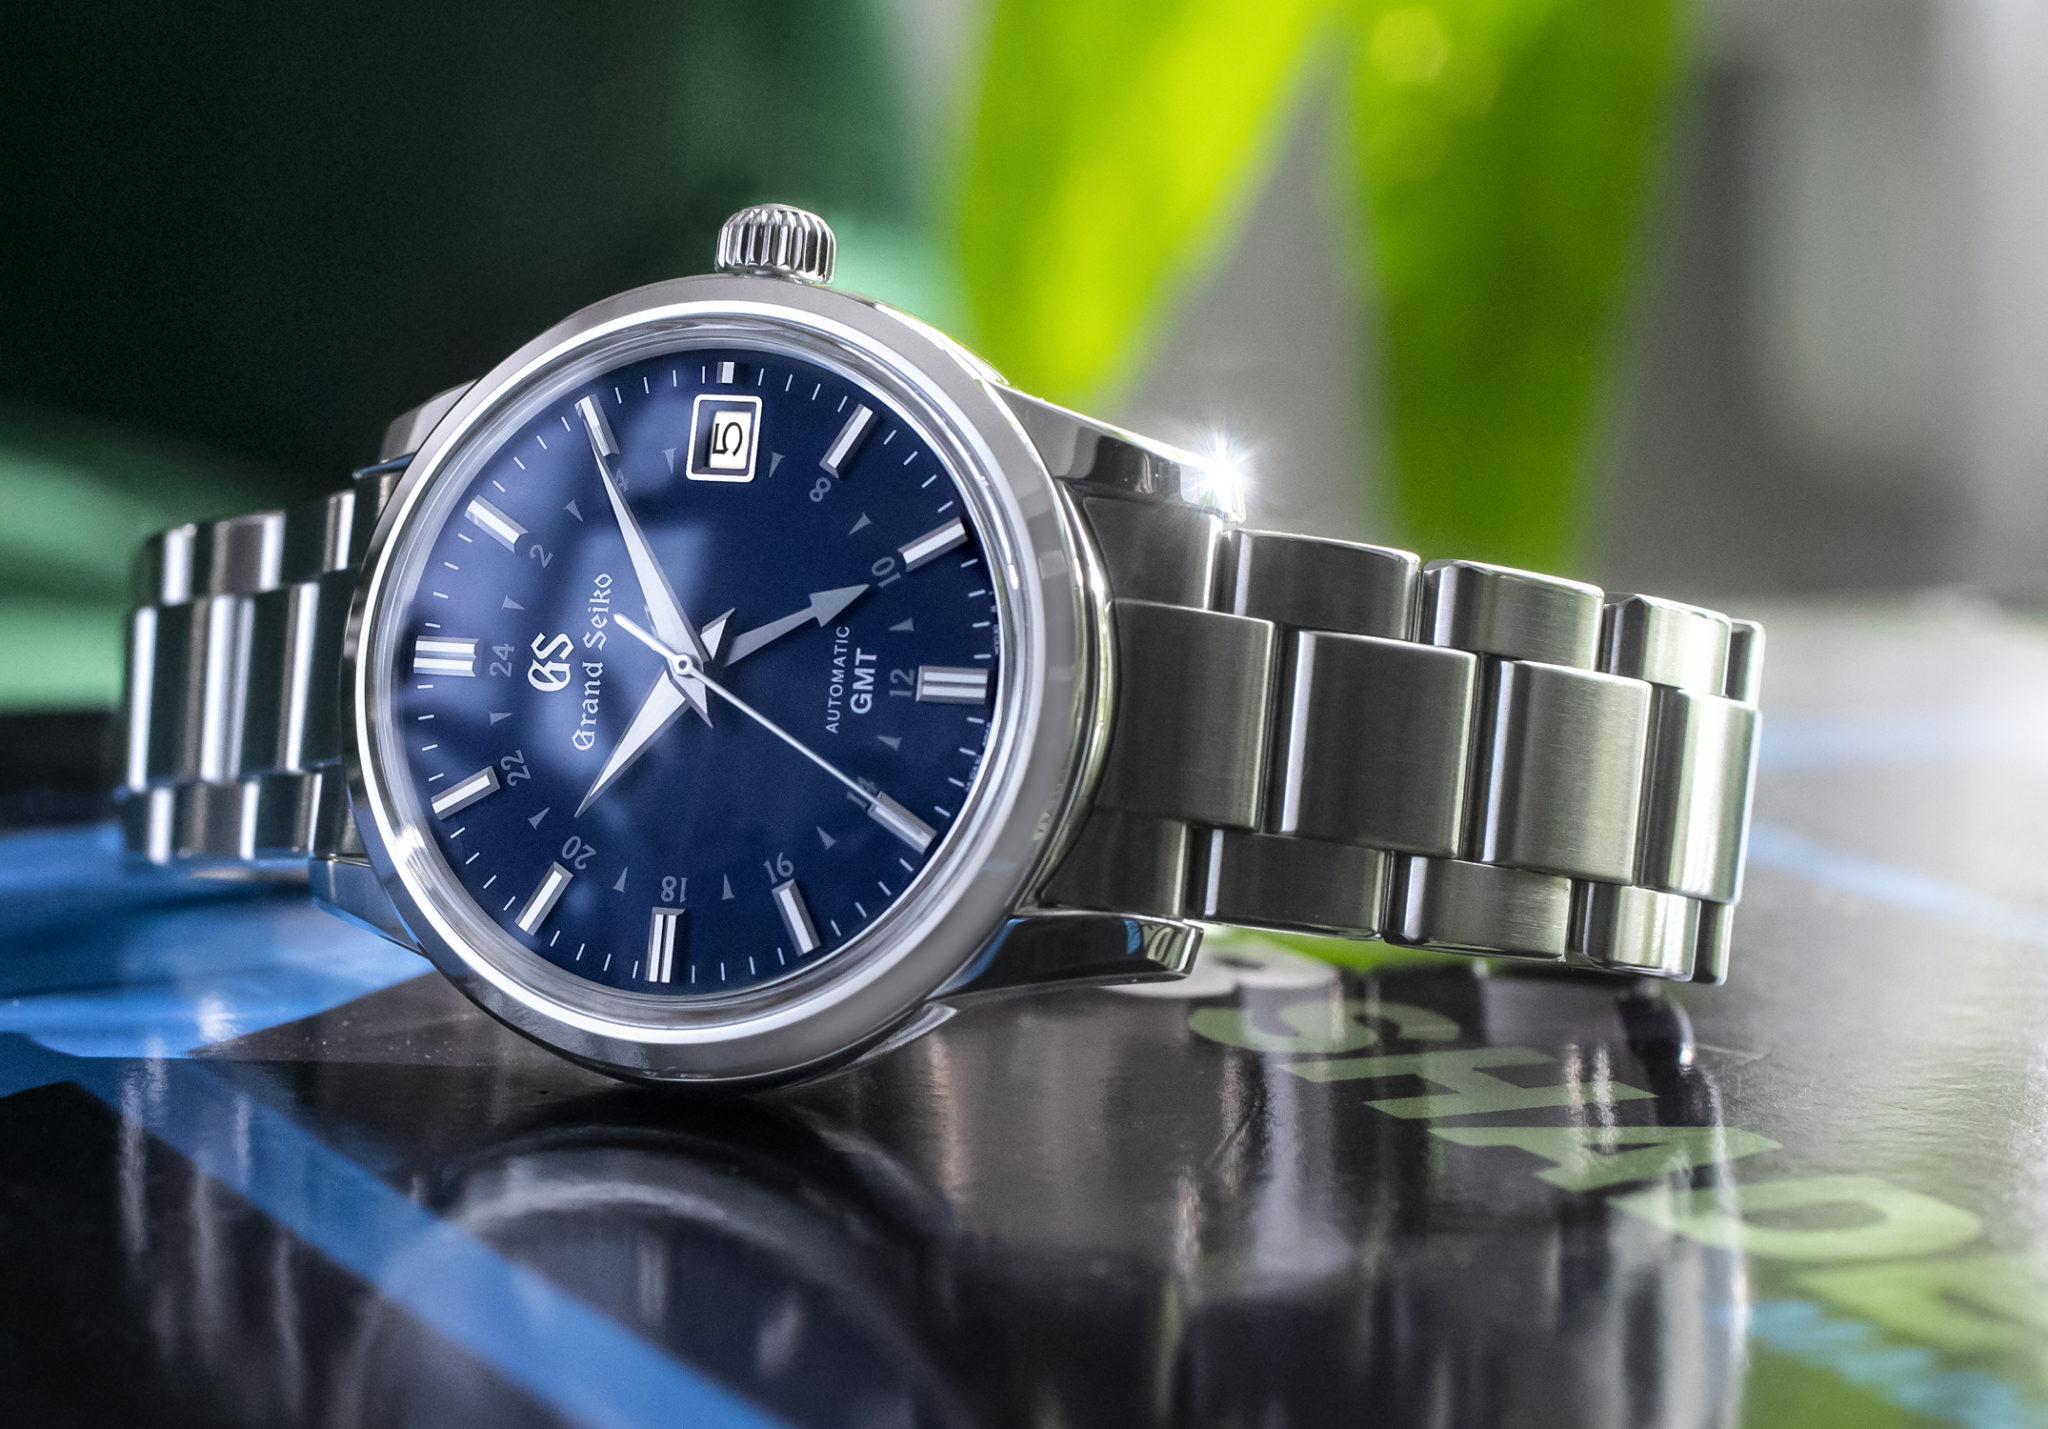 Grand Seiko and Hodinkee finally make an exclusive limited edition together